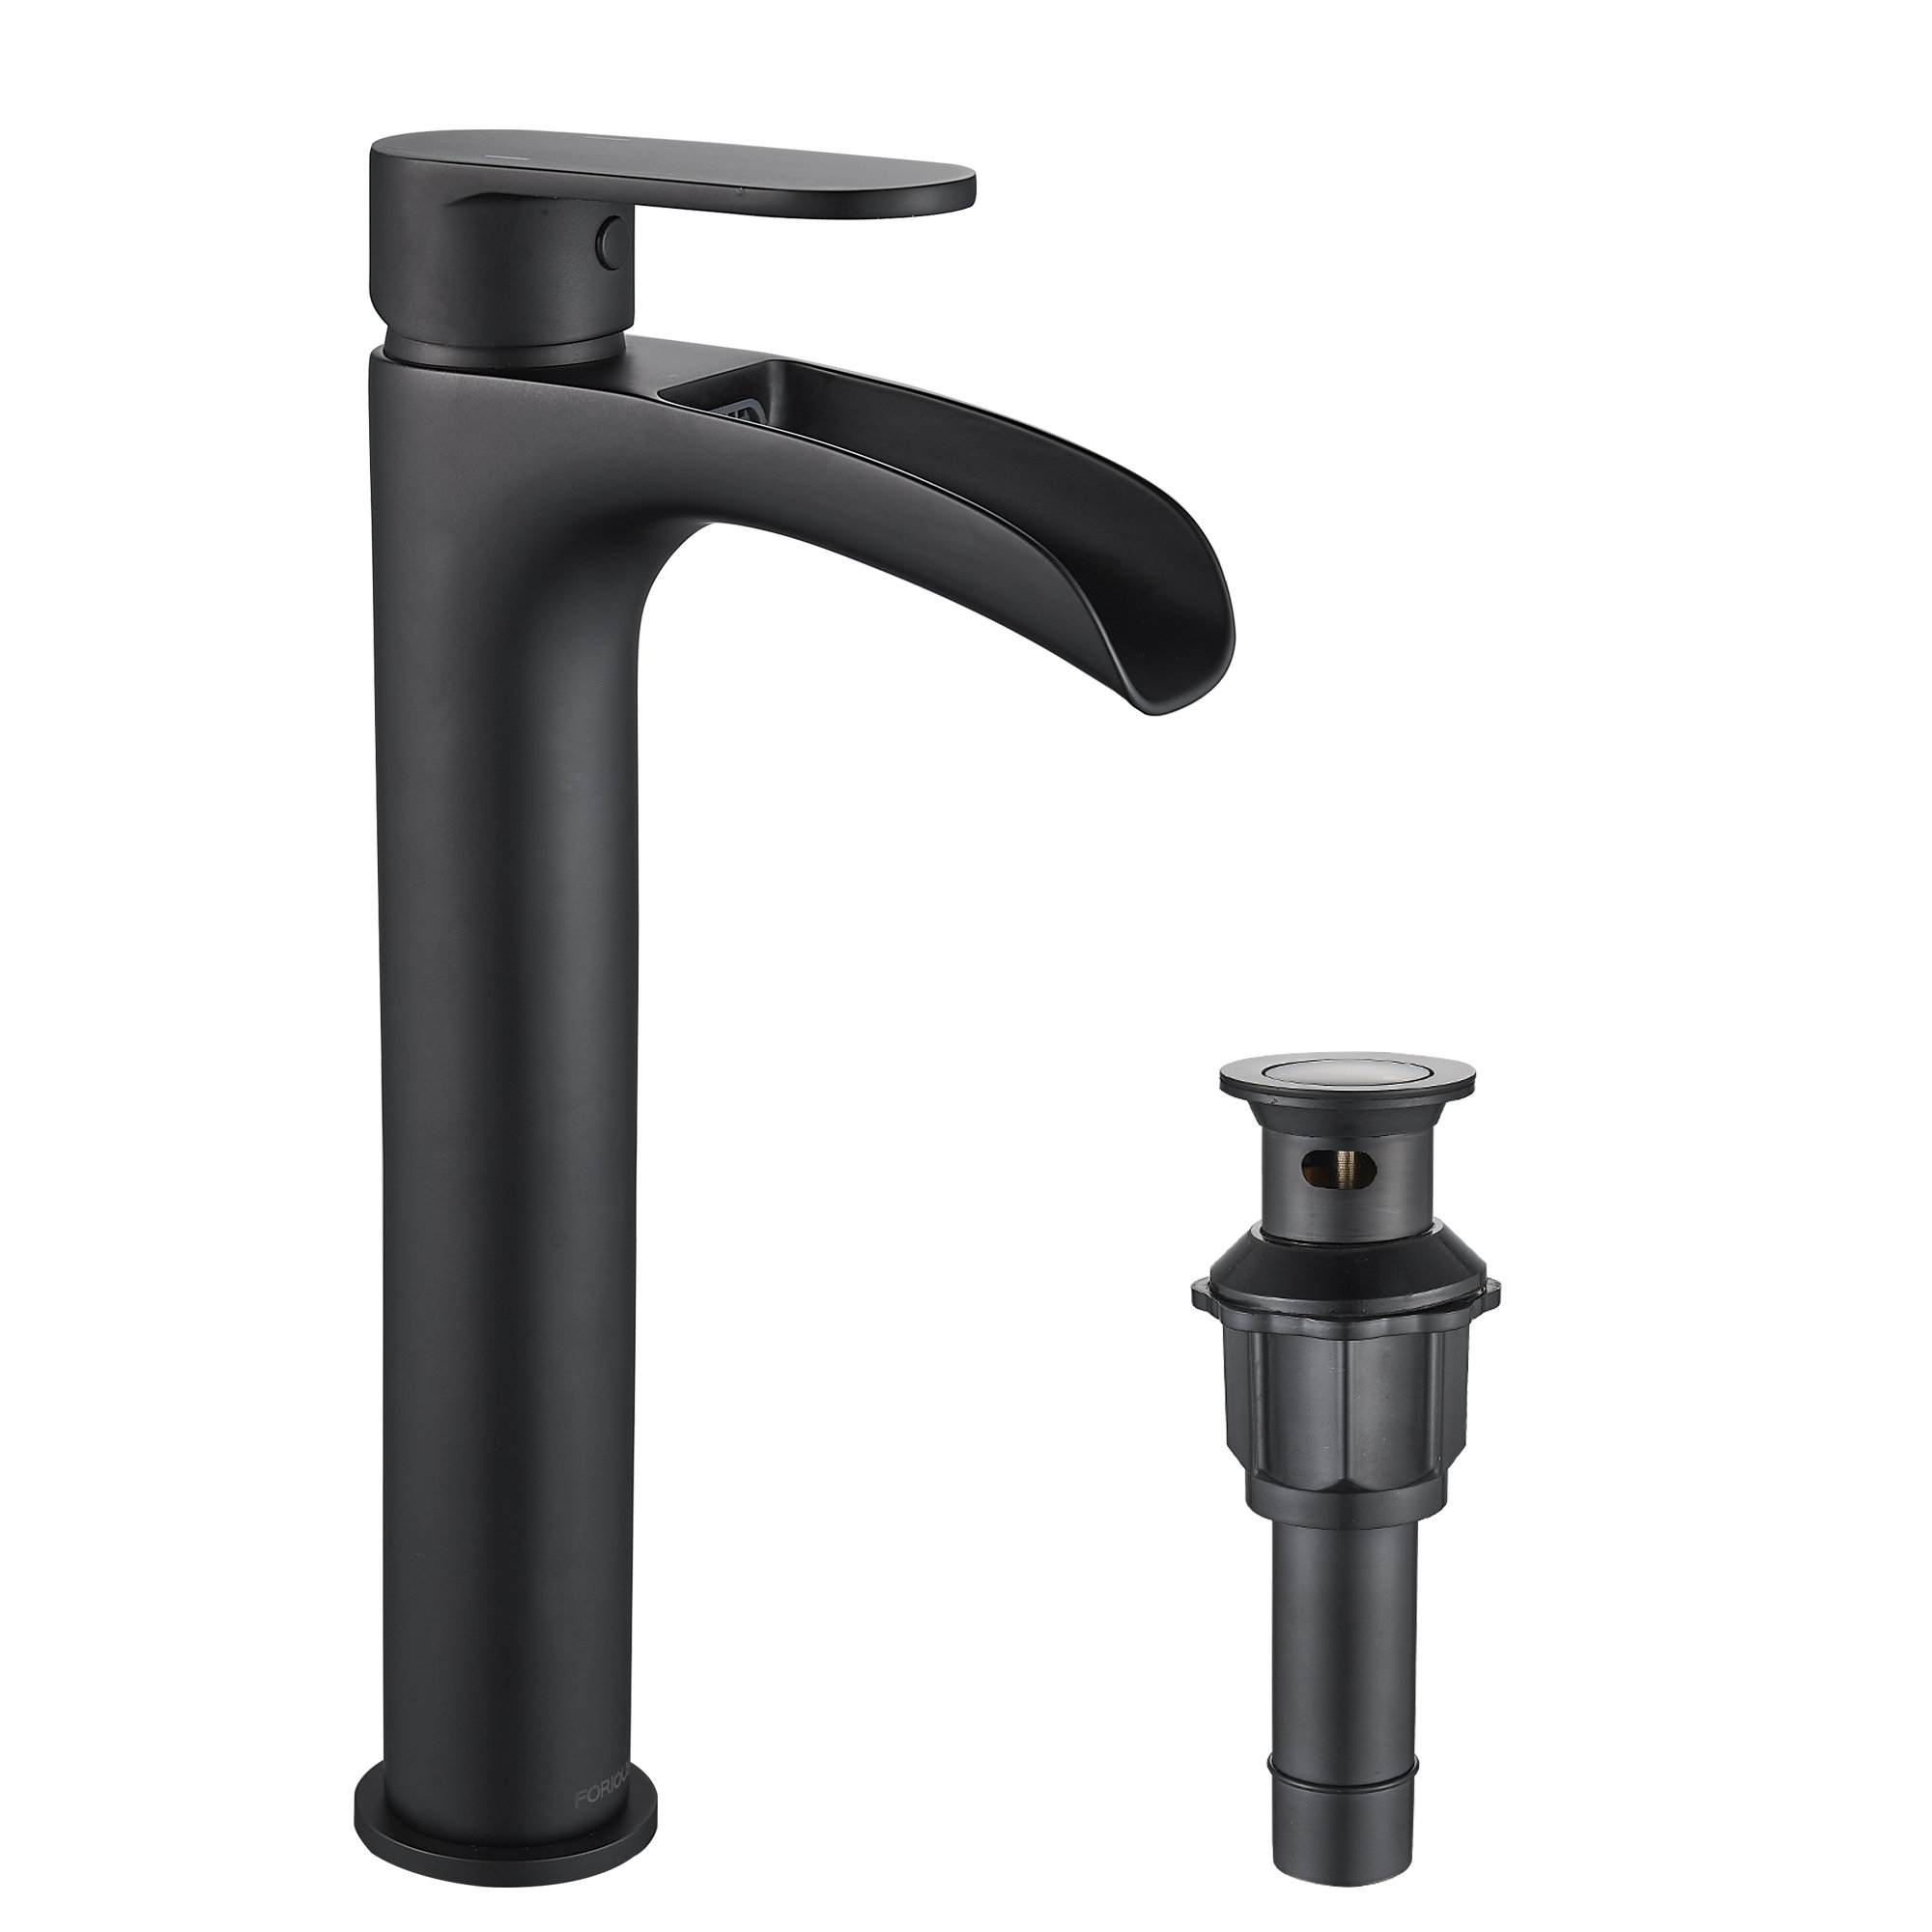 FORIOUS Widespread Faucet 2-handle Bathroom Faucet with Drain Assembly &  Reviews